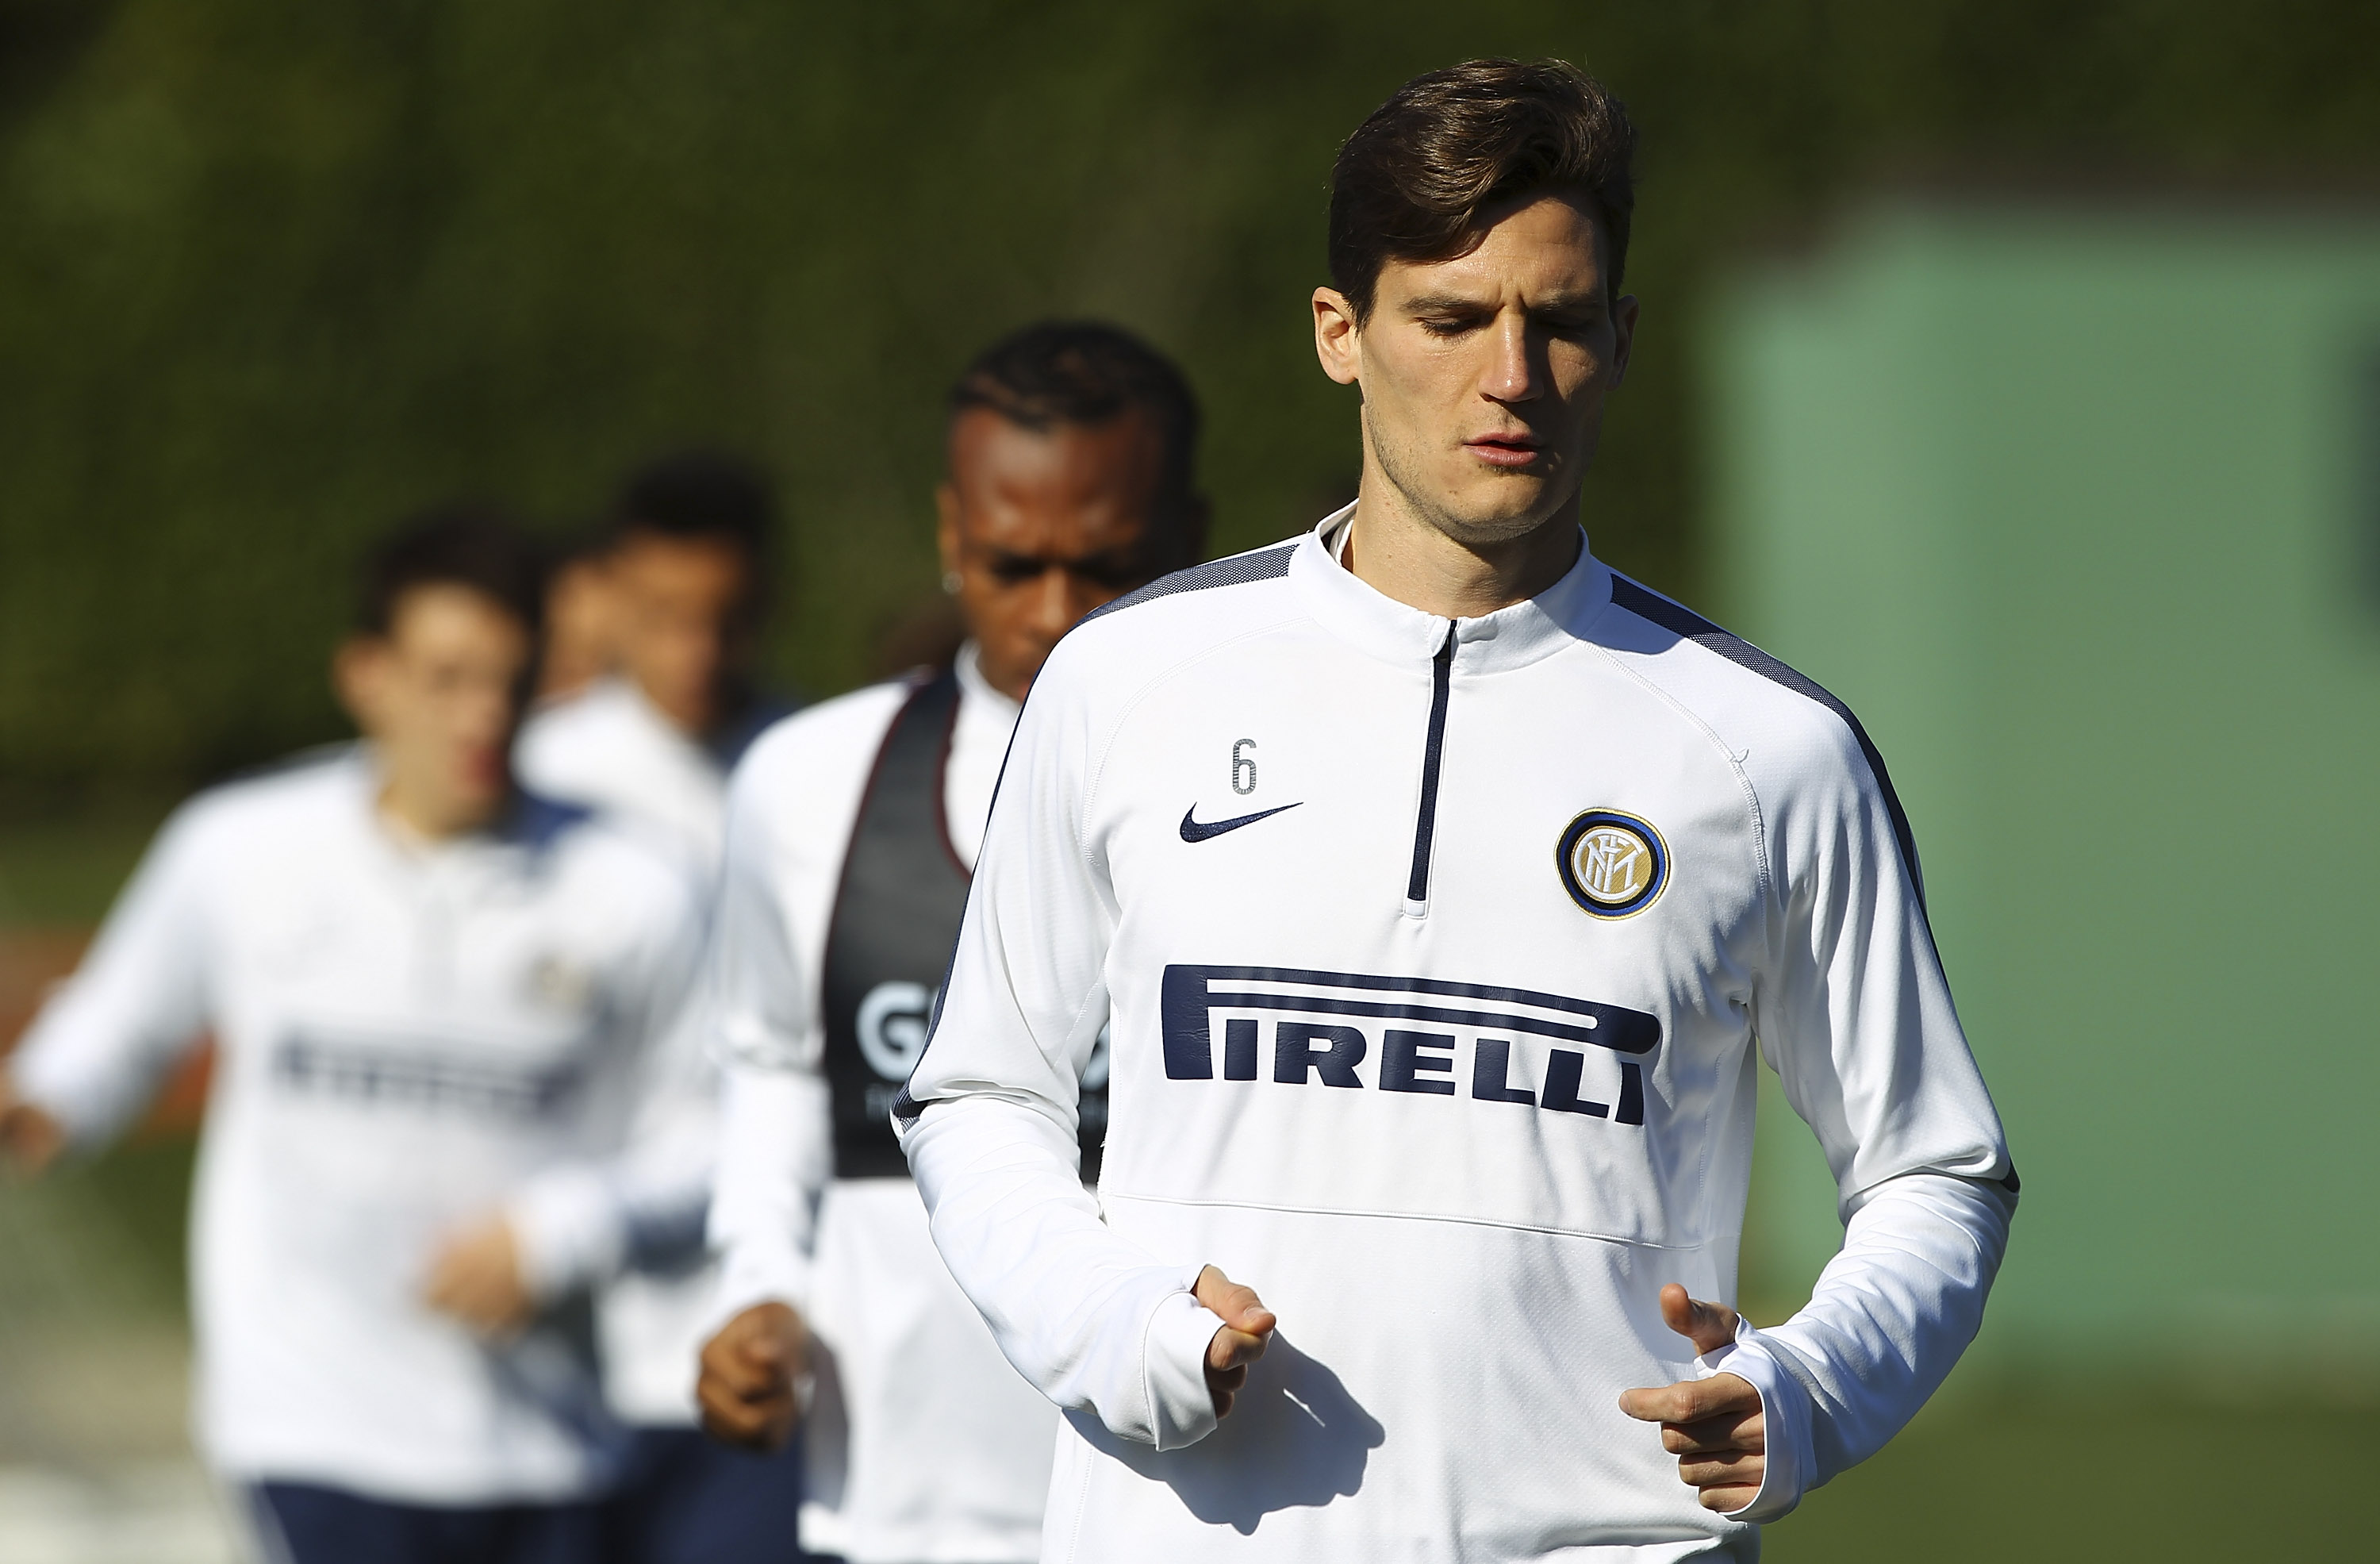 FCIN: Andreolli has offers from Italy and abroad, but his will stays the same, he wants to stay